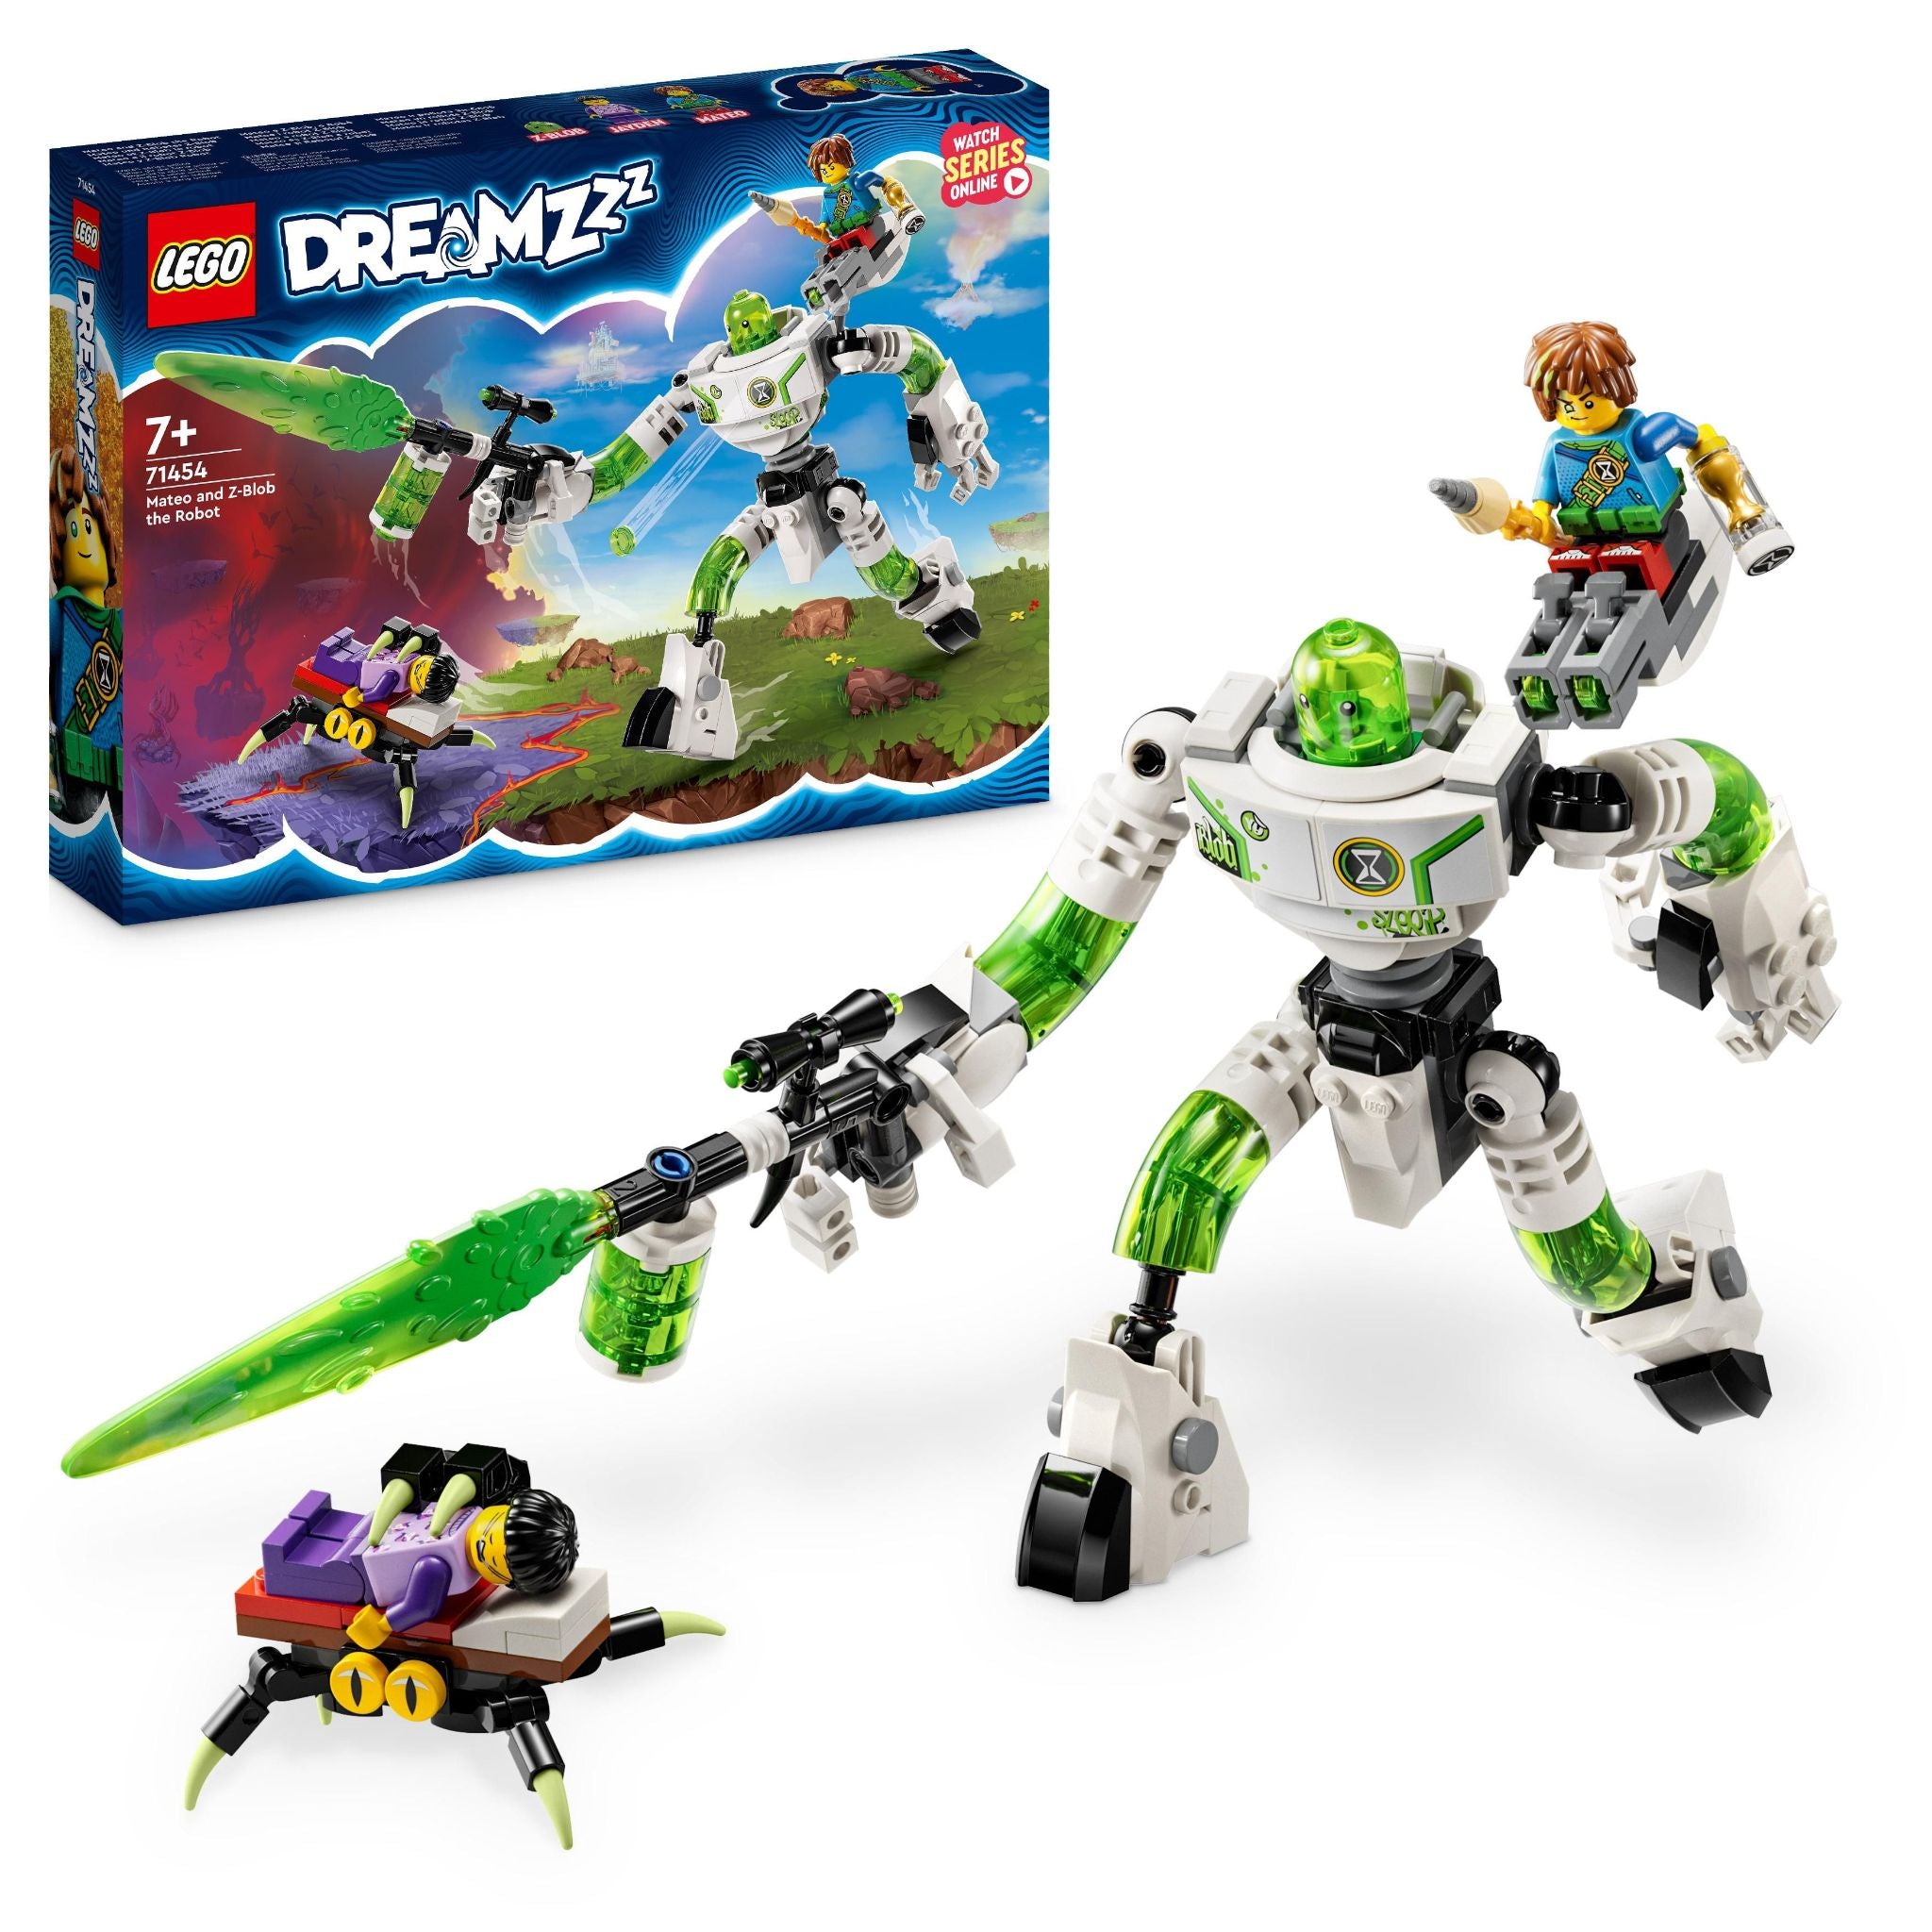 LEGO DREAMZzz: Mateo and Z-Blob the Robot (71454)